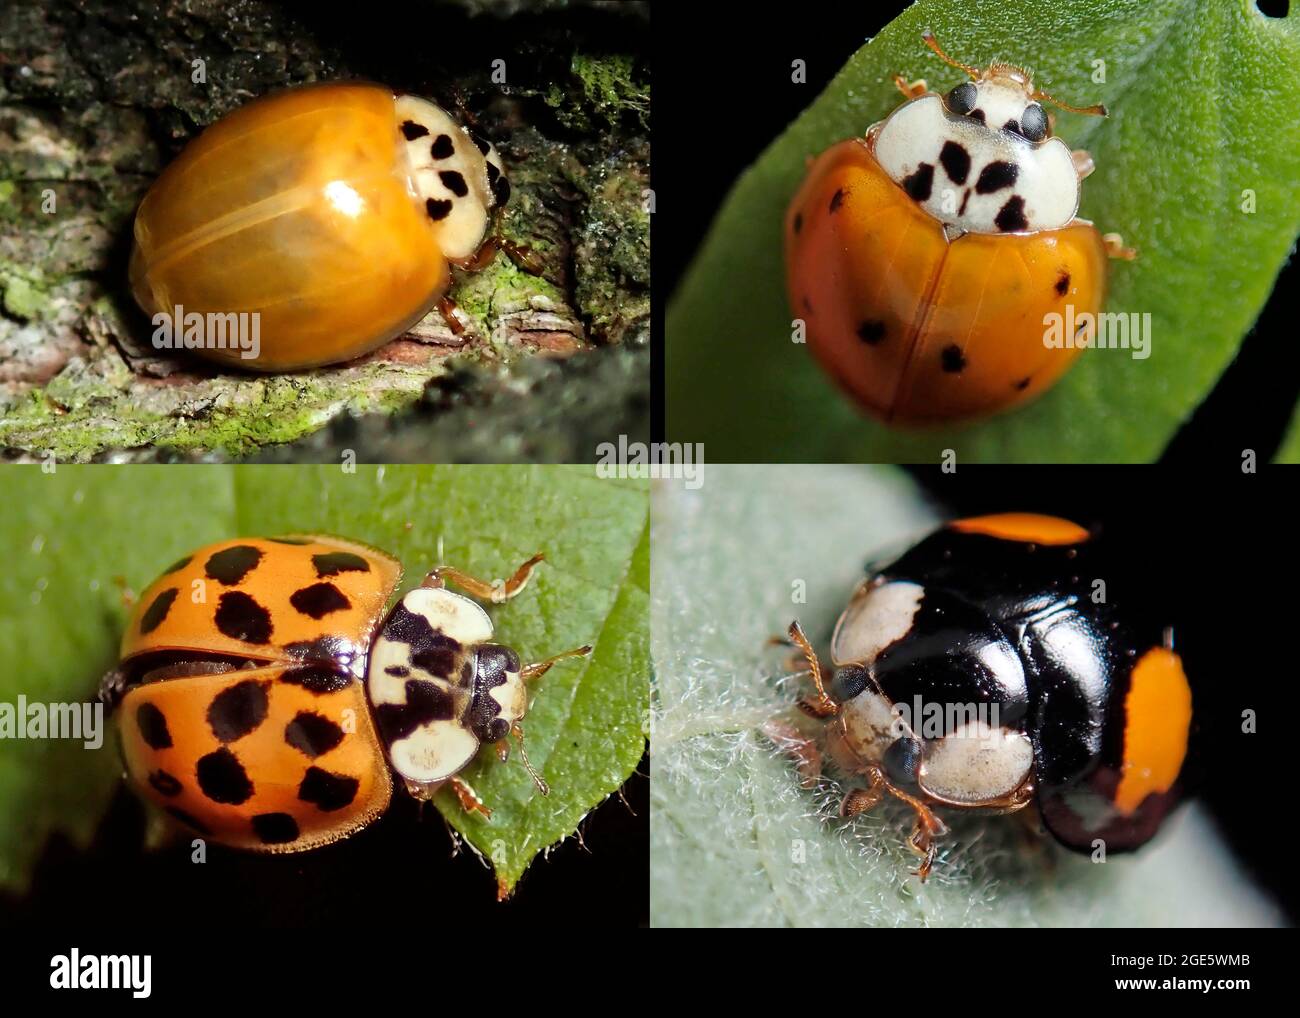 Asian lady beetle (Harmonia axyridis), beneficial insect, aphid, variety, different colour variants, invasive species, Germany Stock Photo